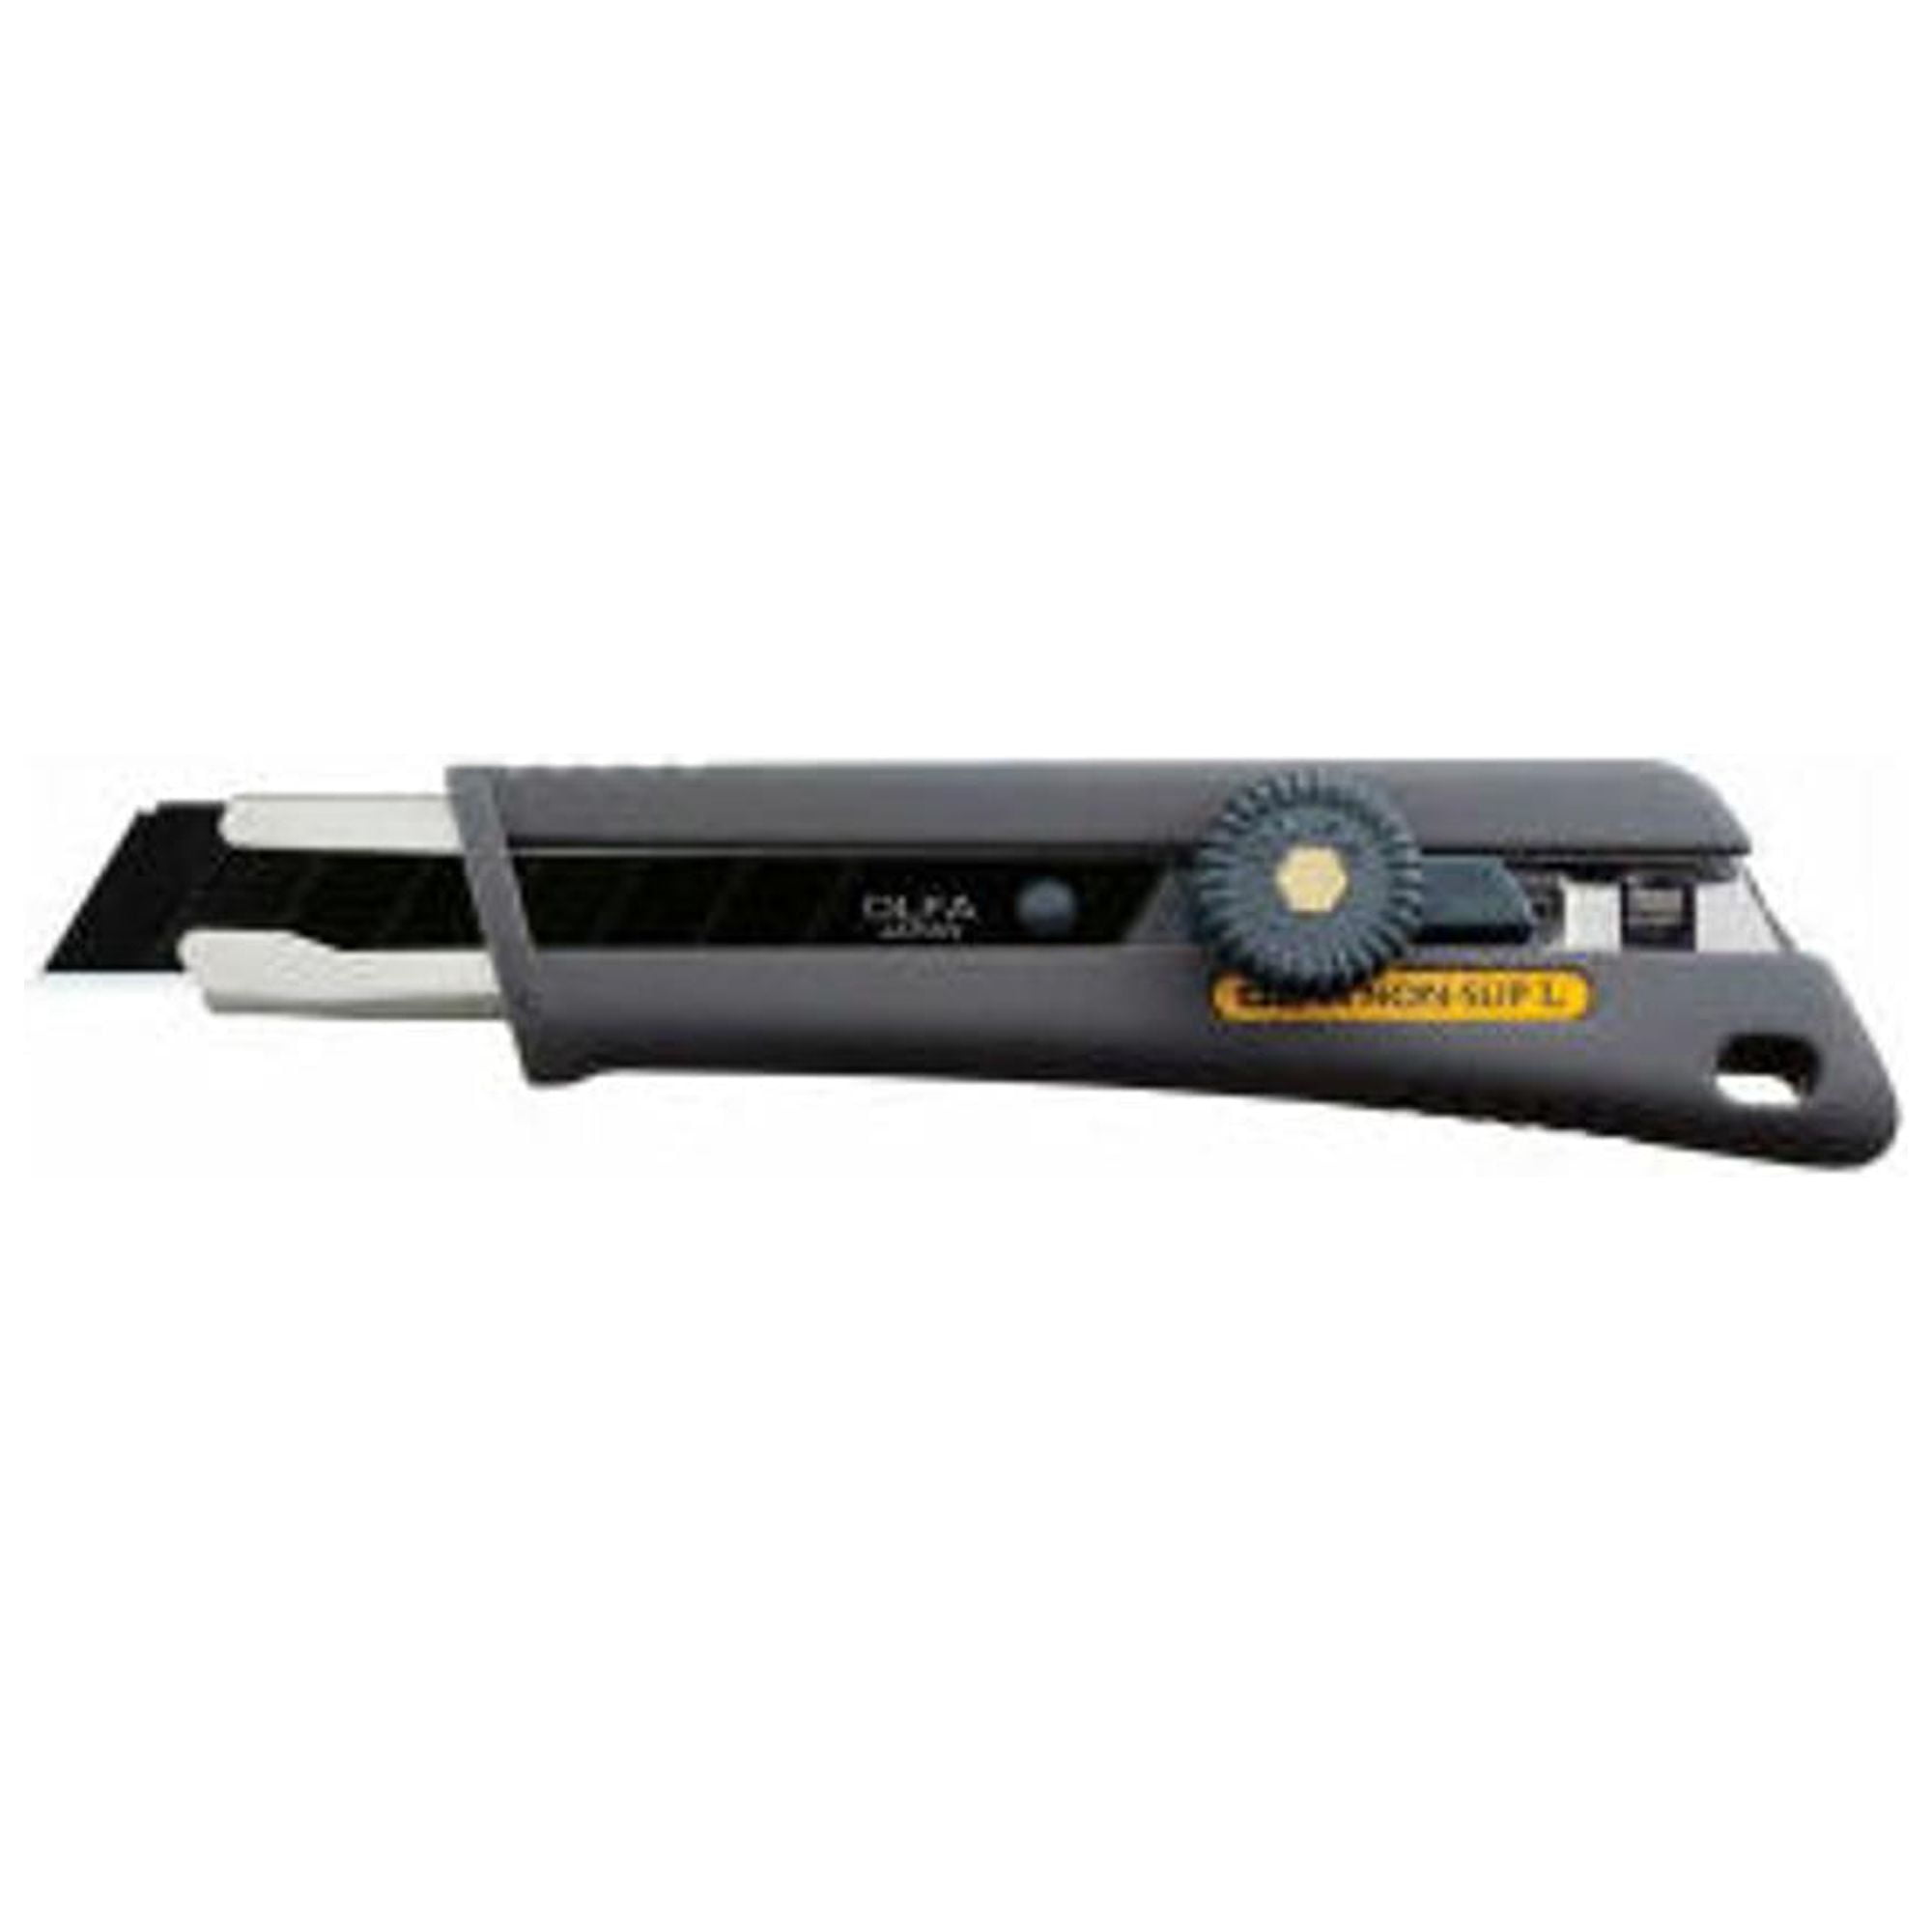 OLFA L-2 18mm Classic Heavy-Duty Utility Knife with Rubber Grip